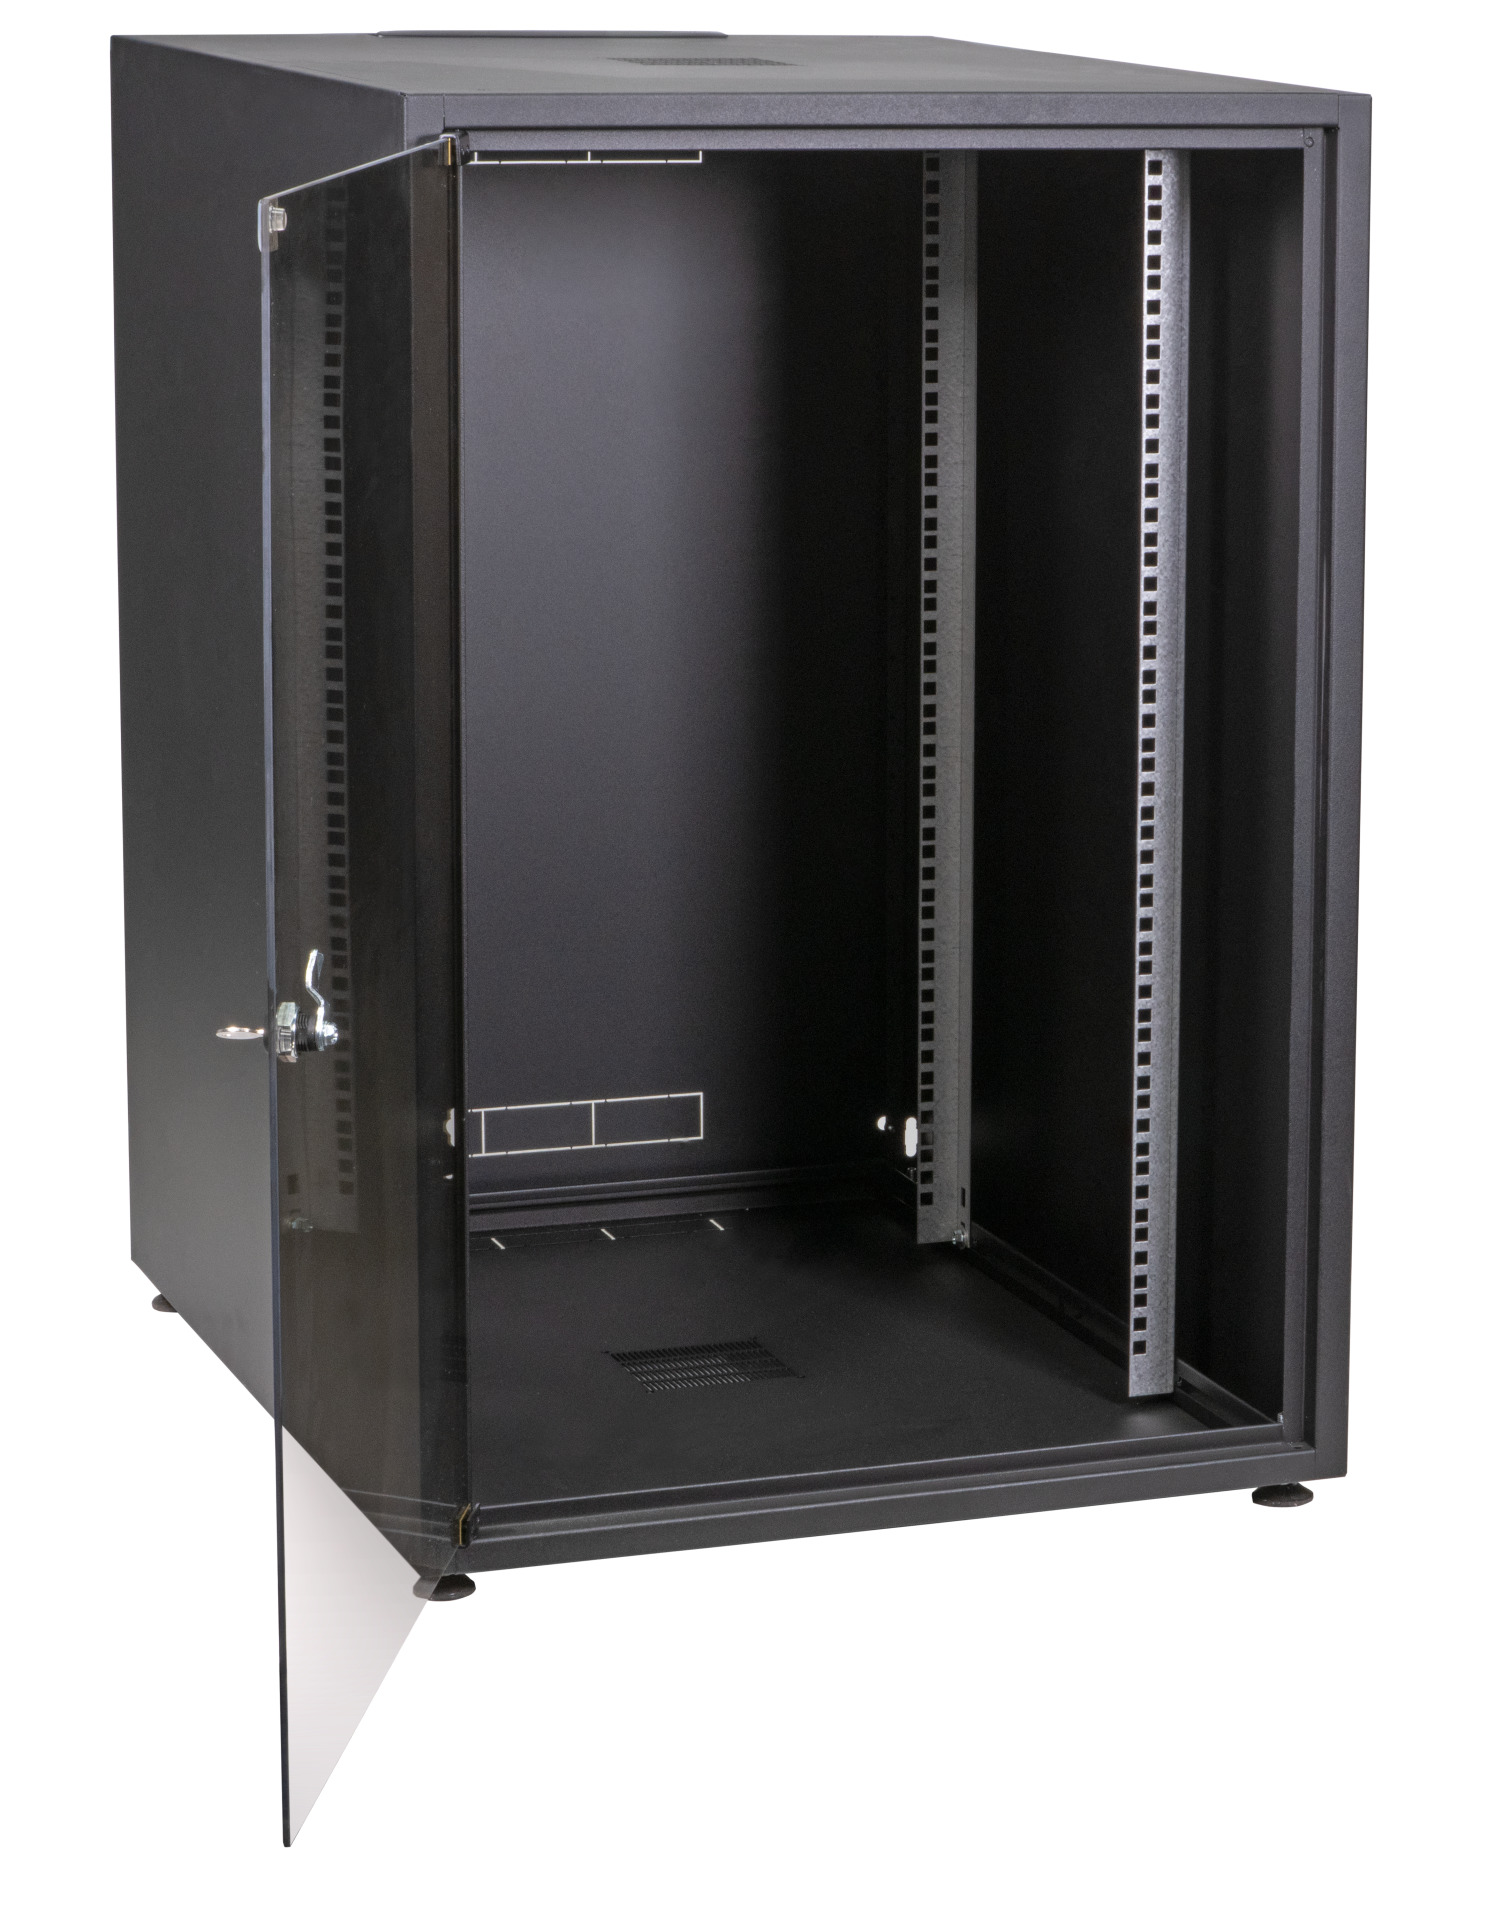 Network Cabinet OFFICE 18U, 600x800 mm, RAL9005